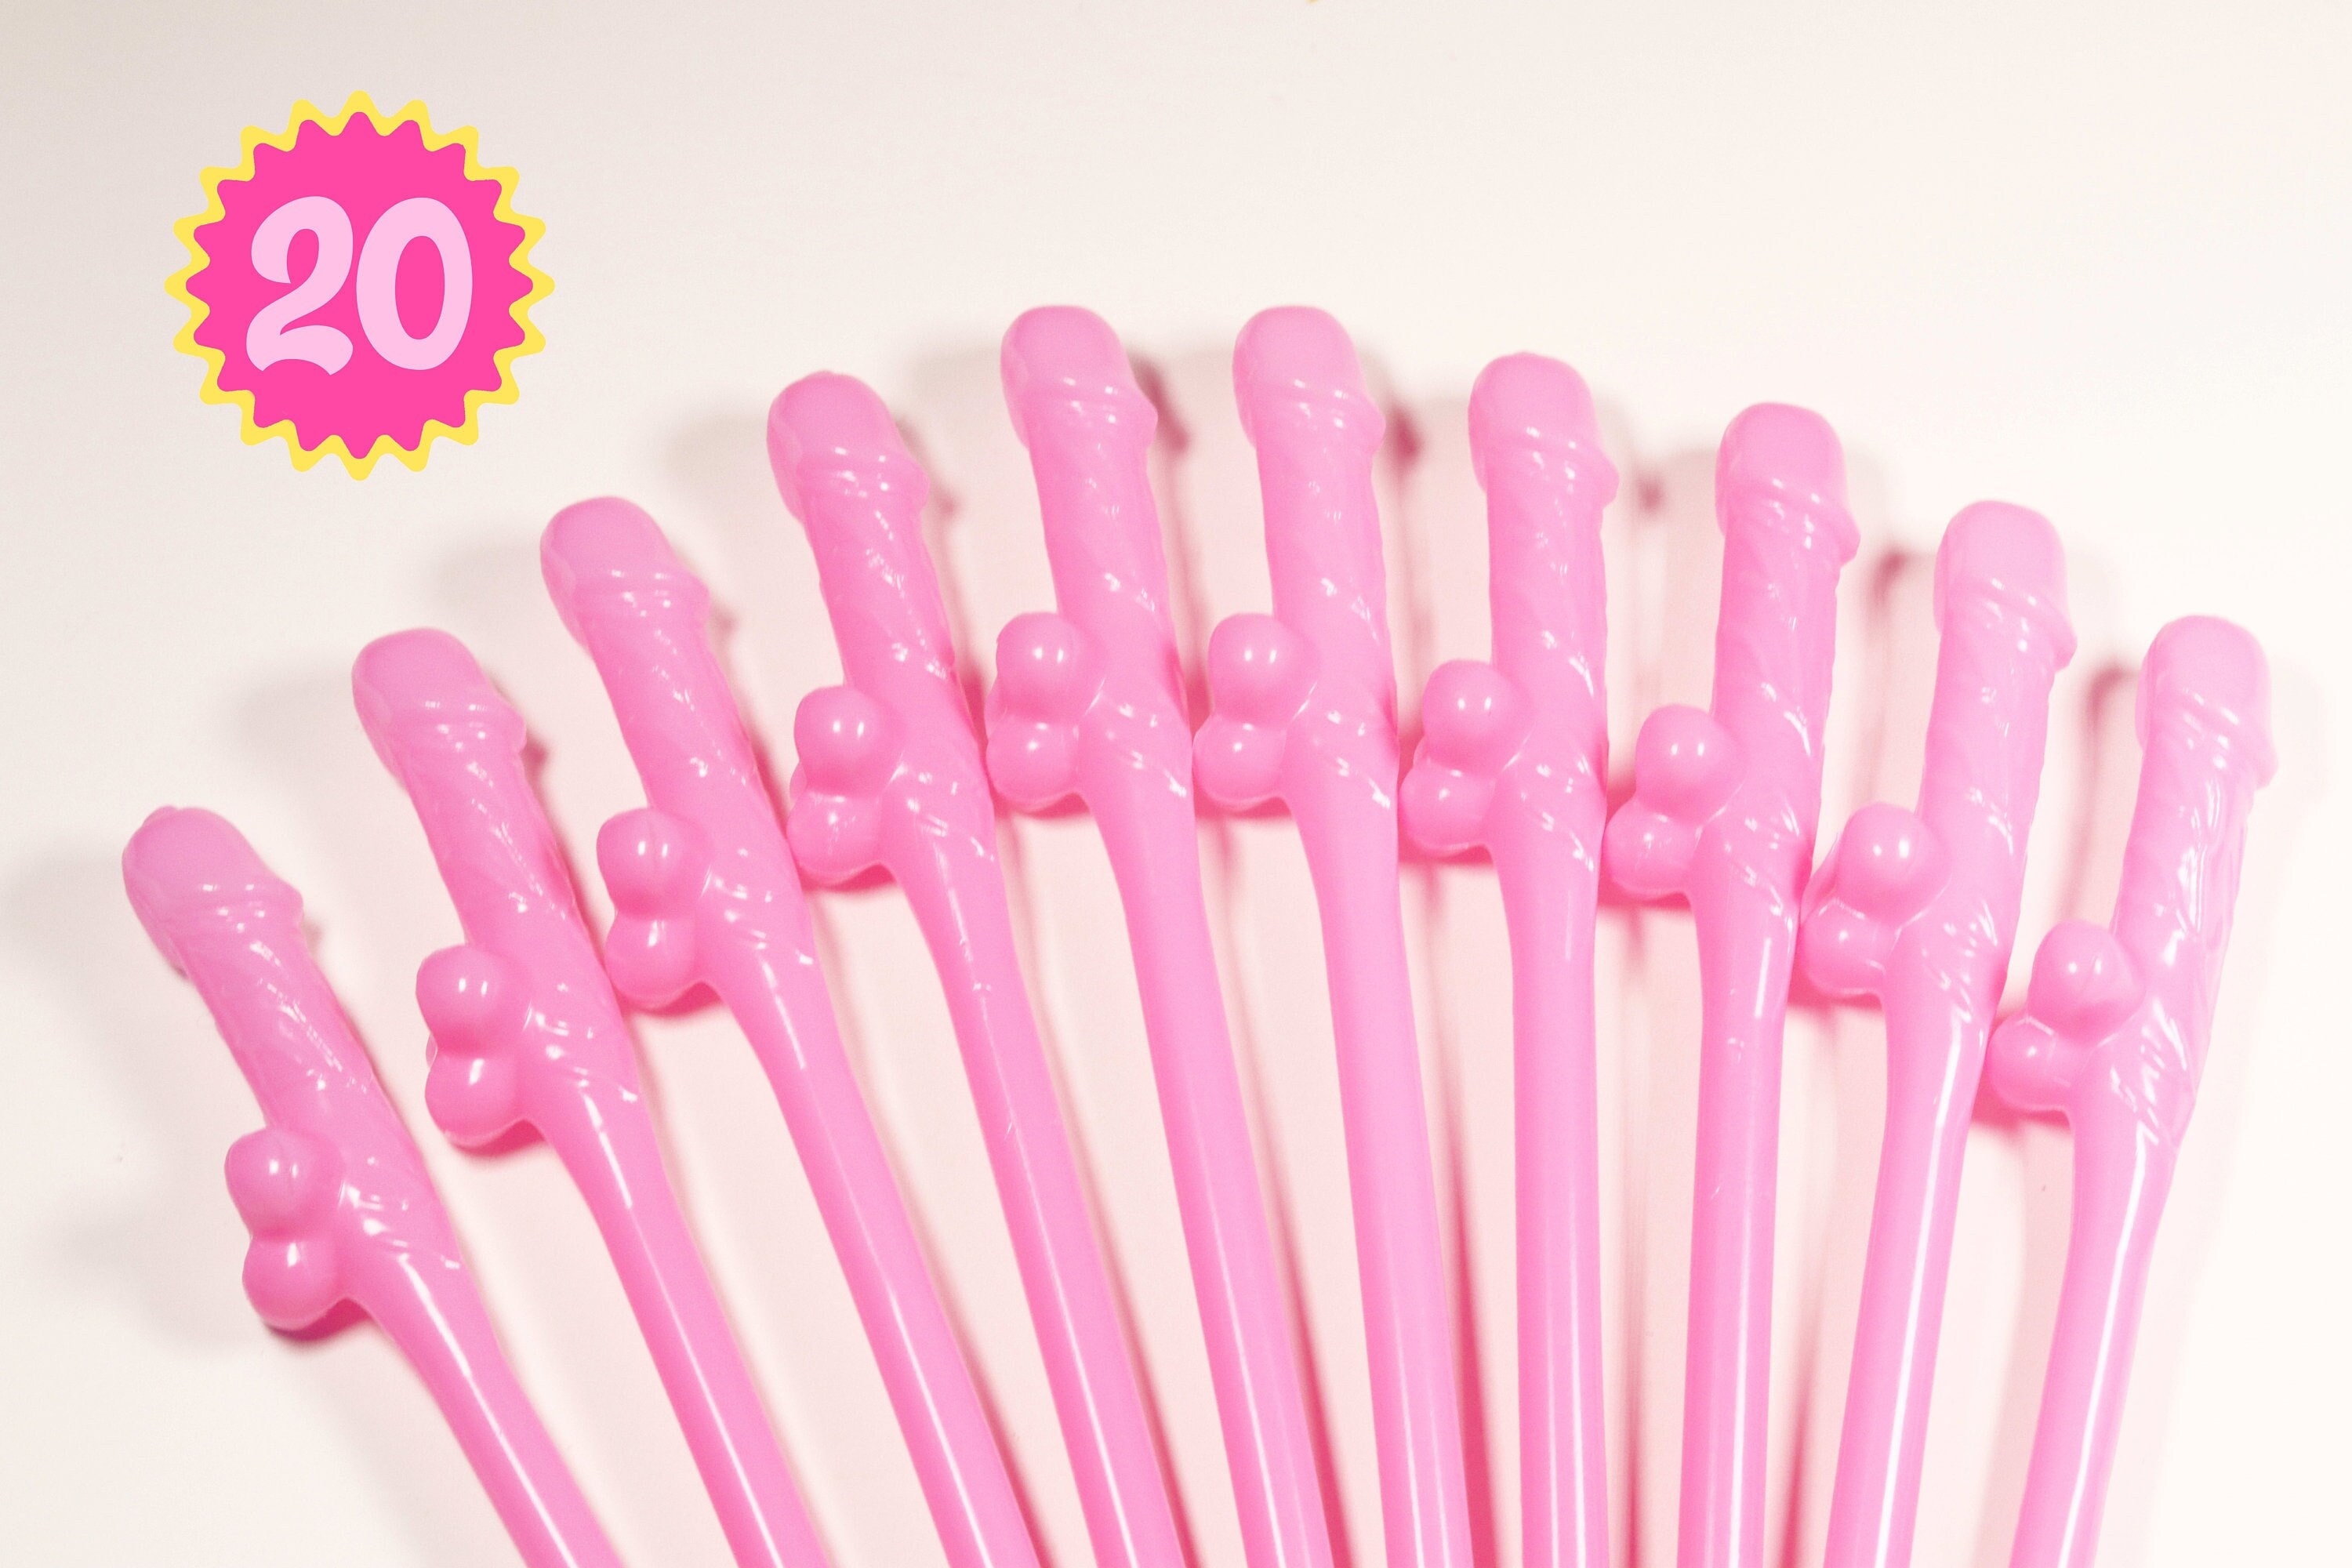 Penis Straws and Penis Whistles, Bachelorette Party Whistles, Dick Straws,  Flesh Willy Whistle, Pink Penis Bachelorette party Favors, Pride